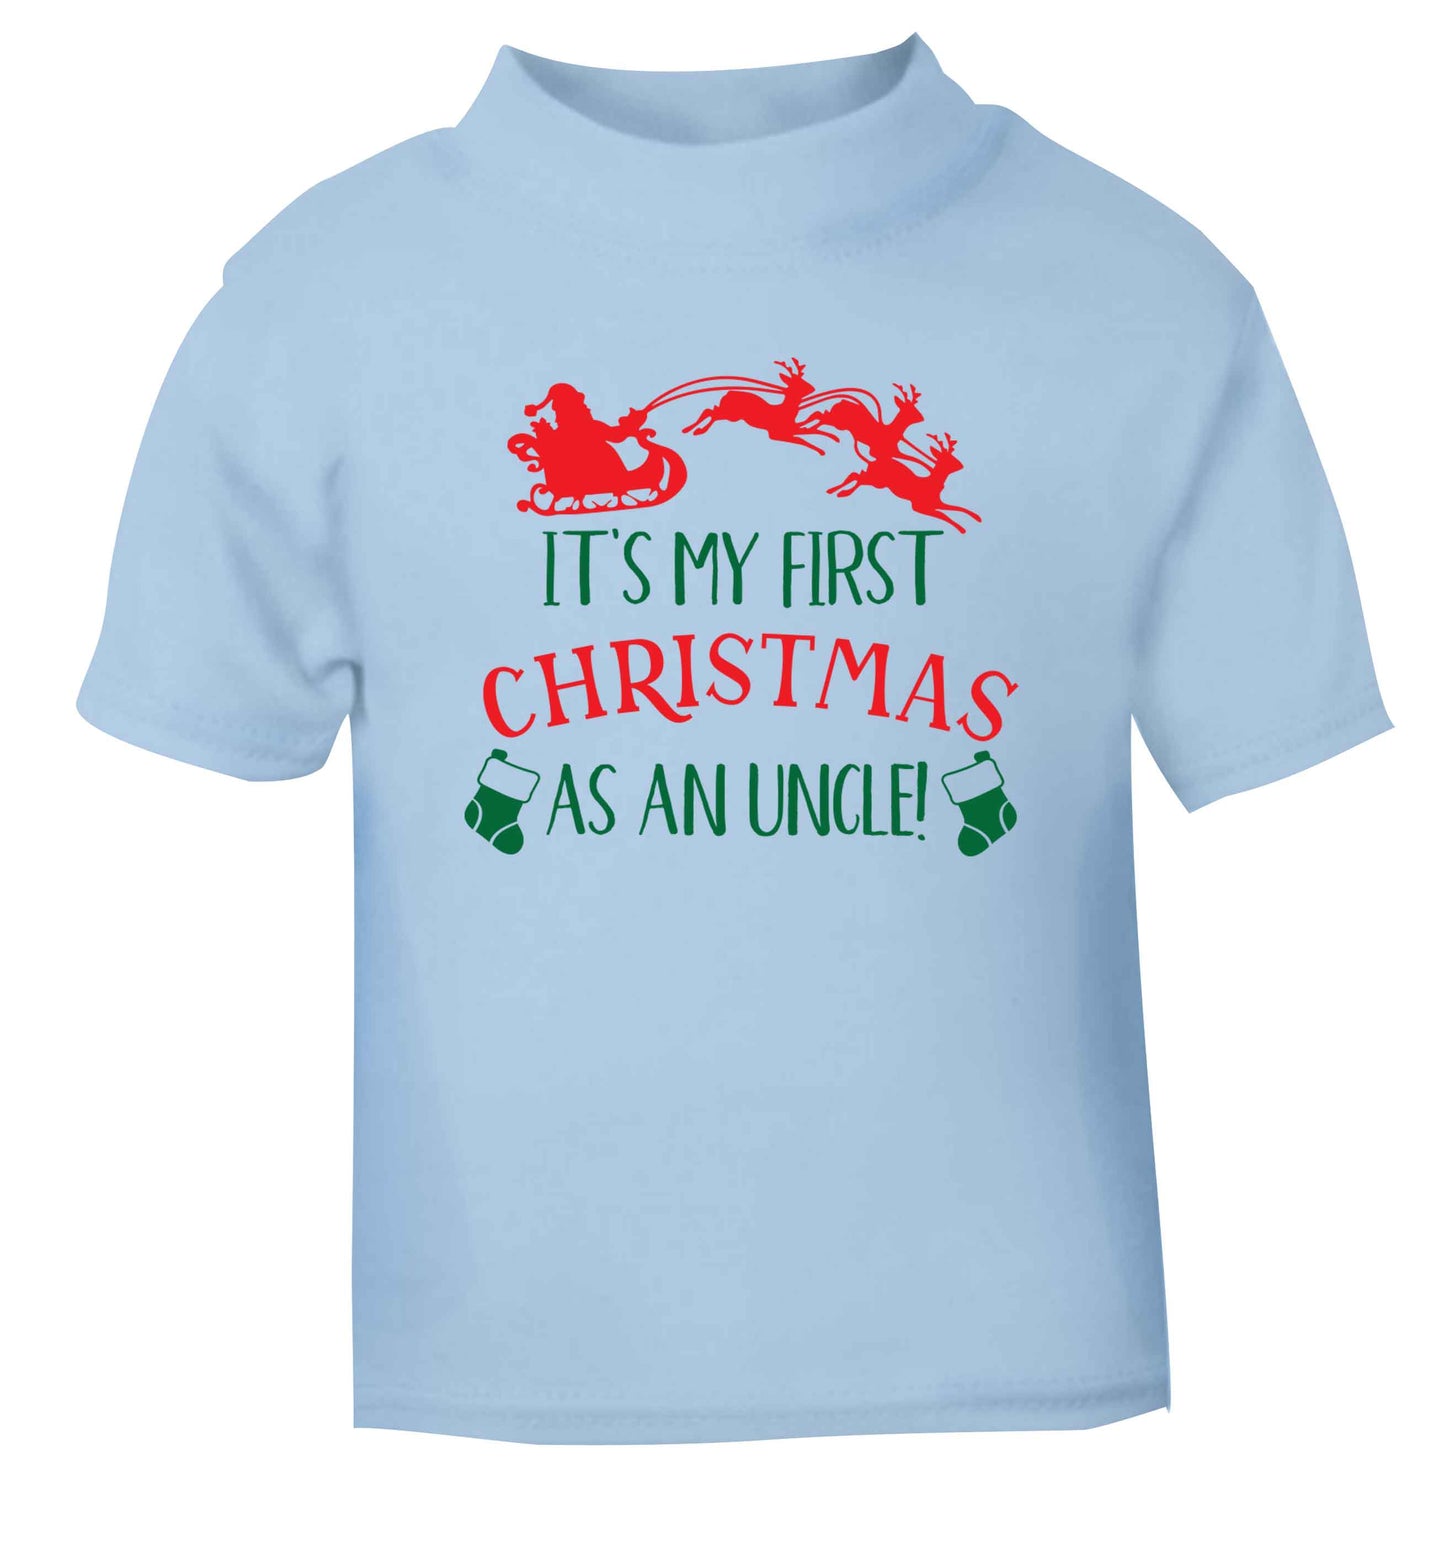 It's my first Christmas as an uncle! light blue Baby Toddler Tshirt 2 Years